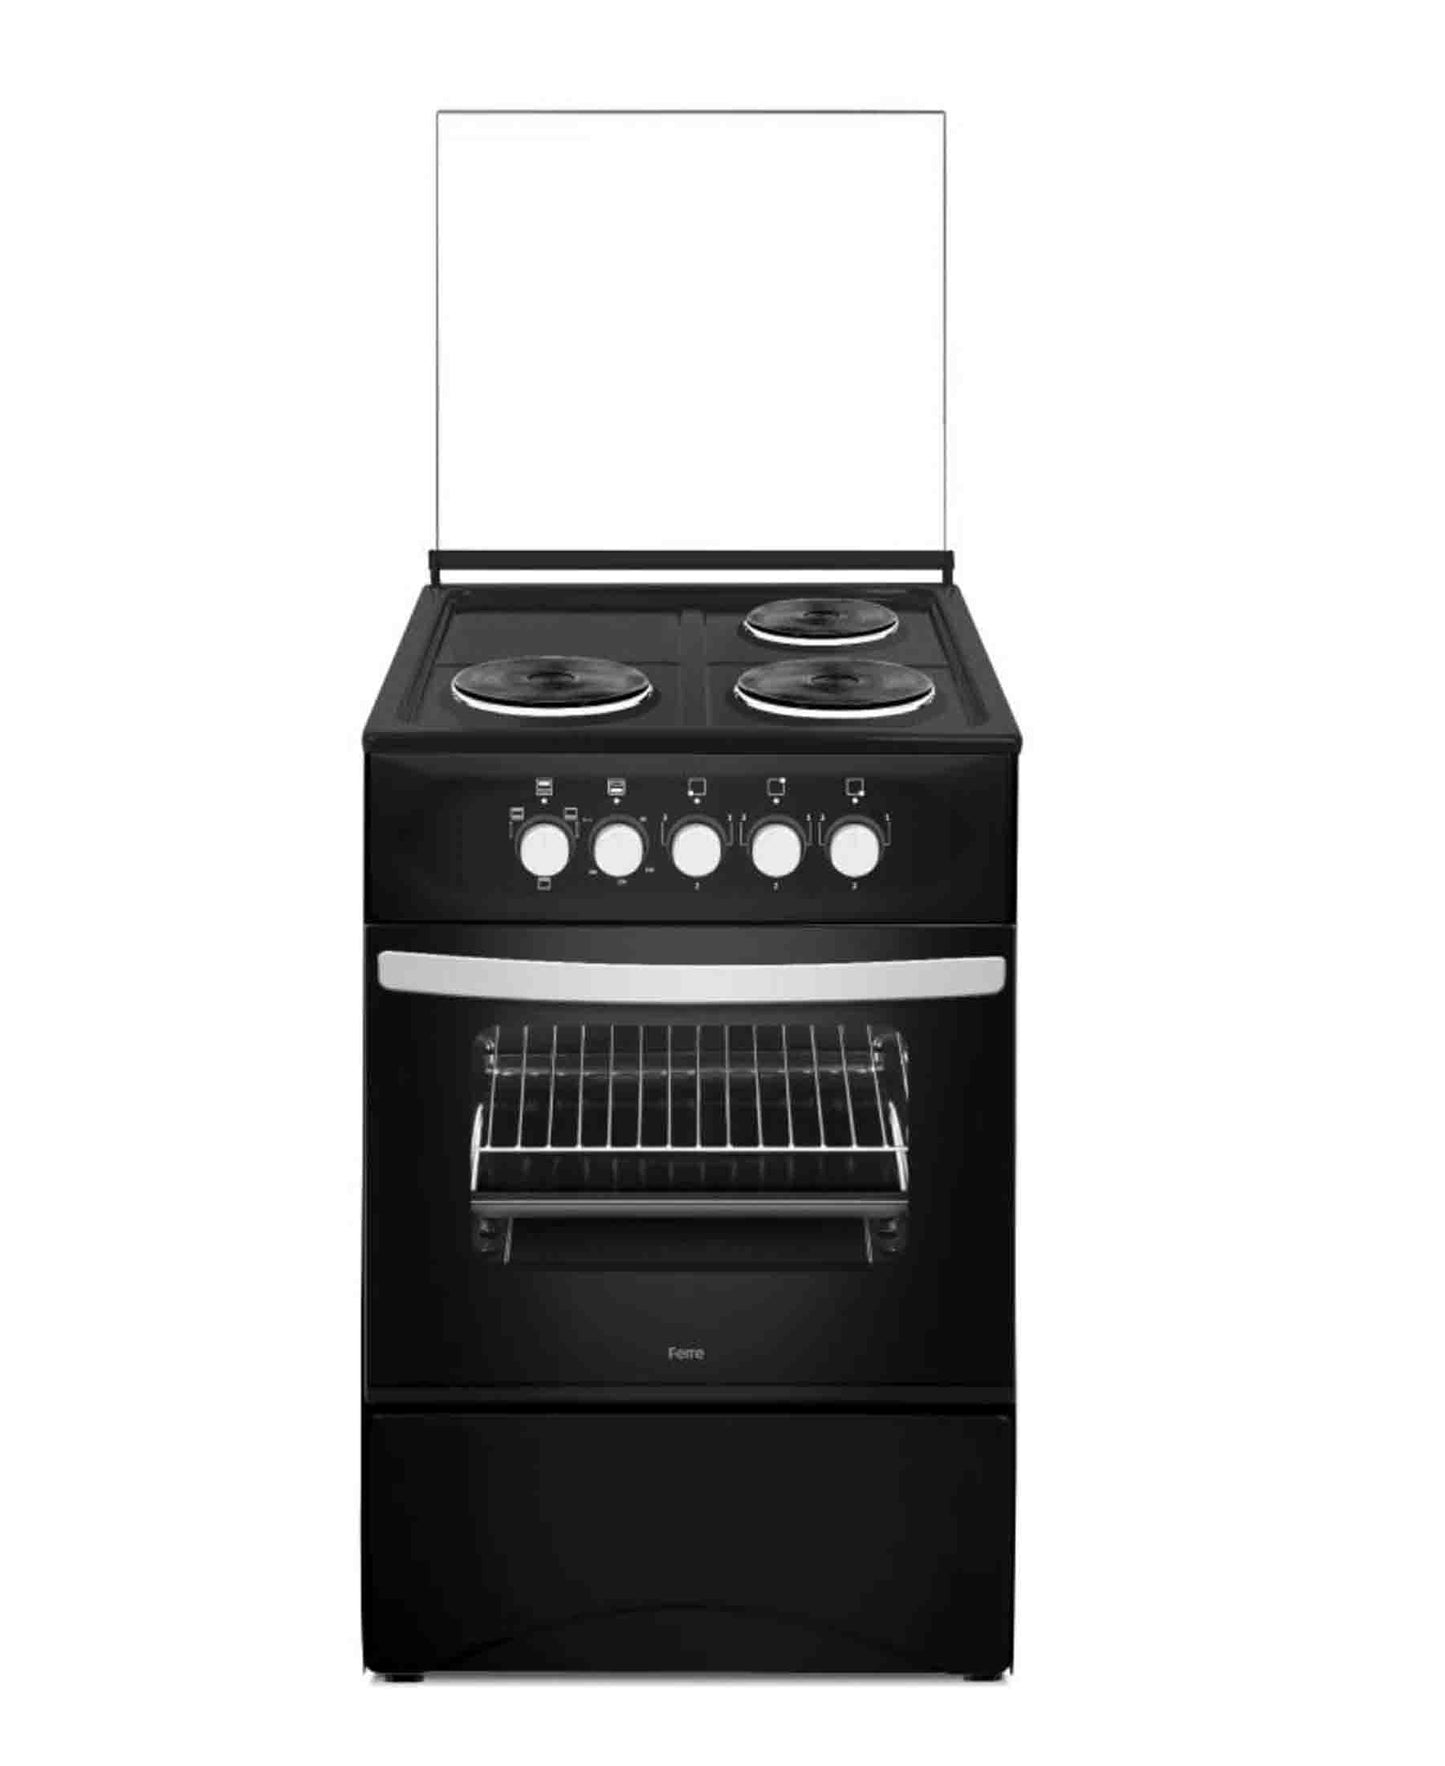 Ferre 3 Plate Free Standing Electrical Cooker – Black